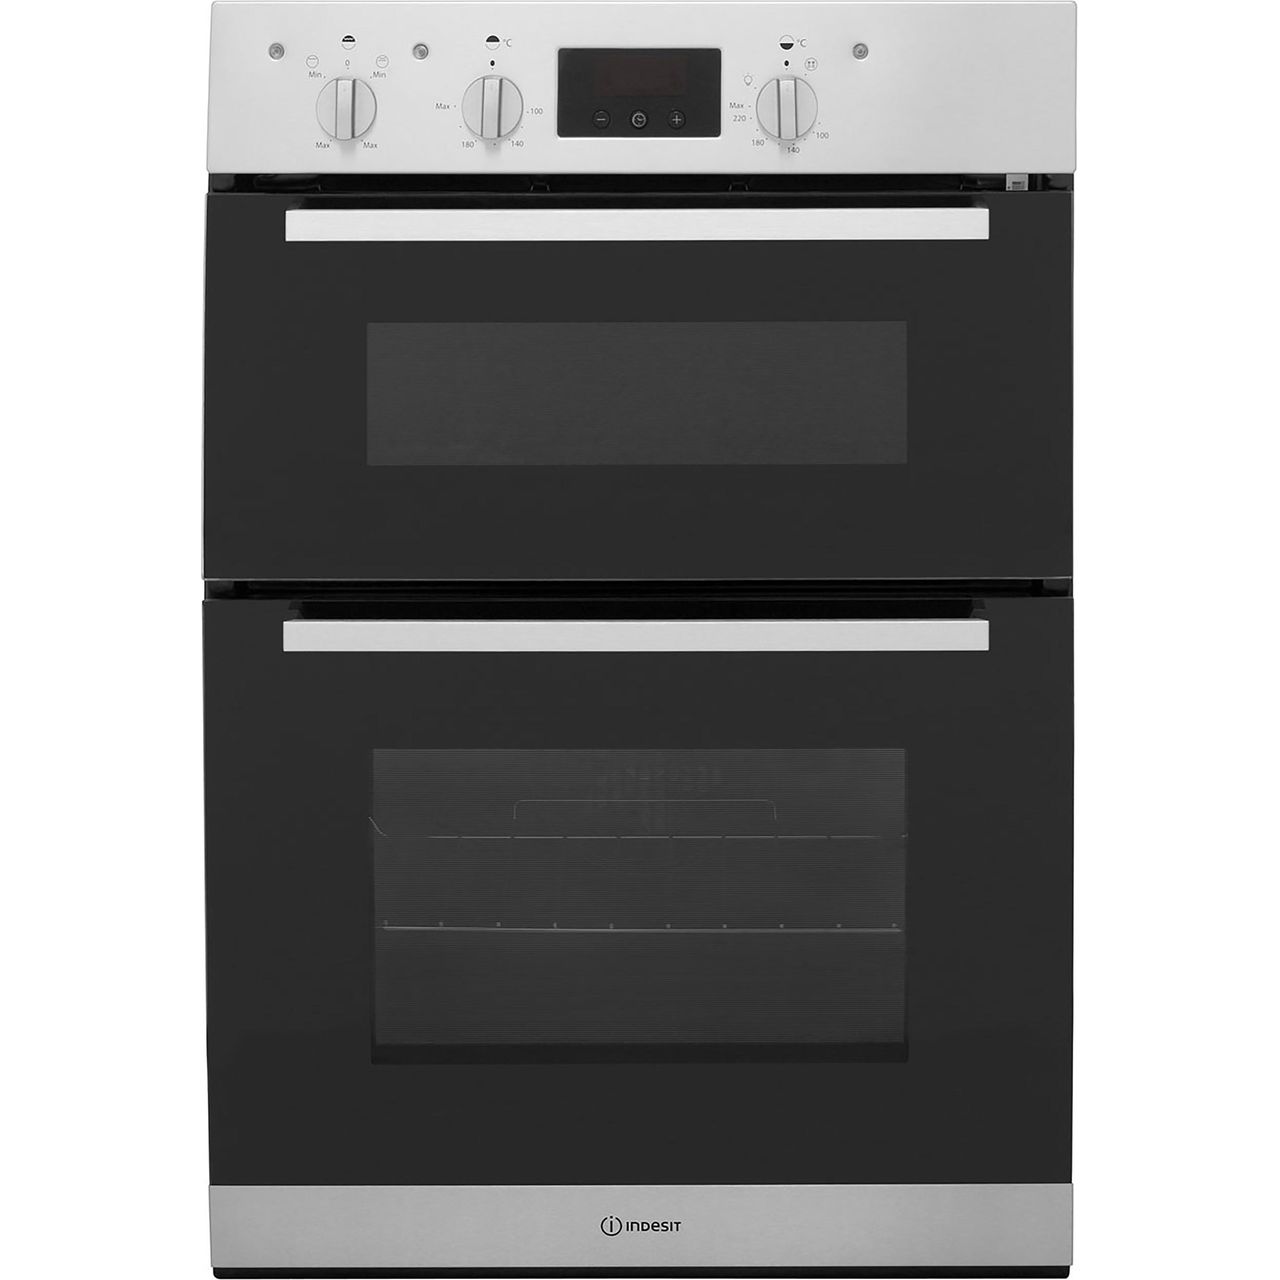 Indesit Aria IDD6340IX Built In Double Oven Review